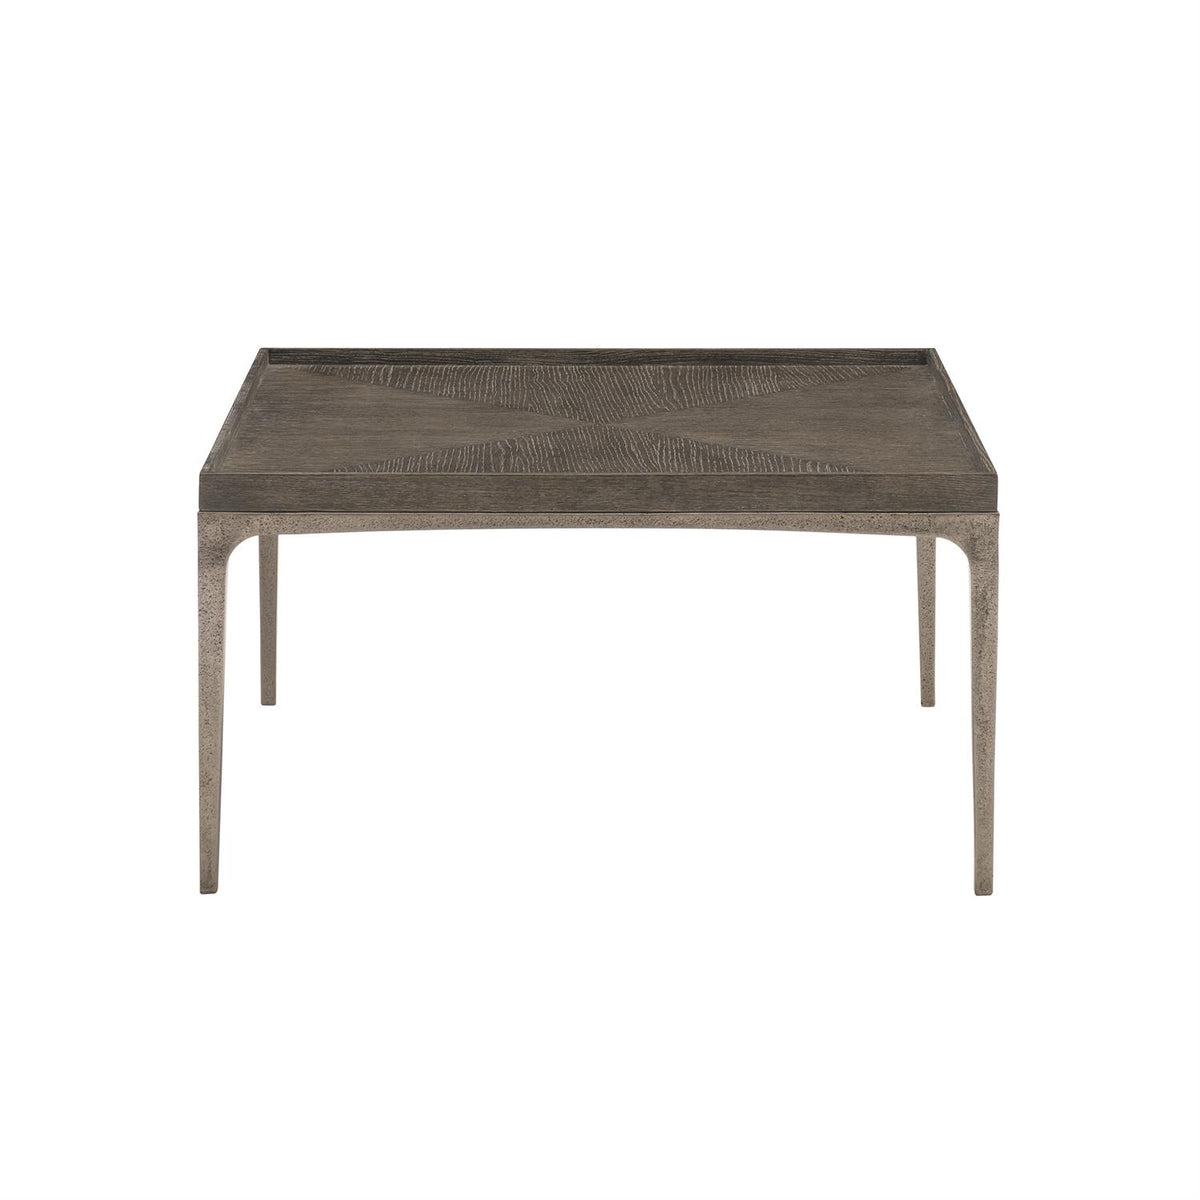 Strata Wooden Top Cocktail Table